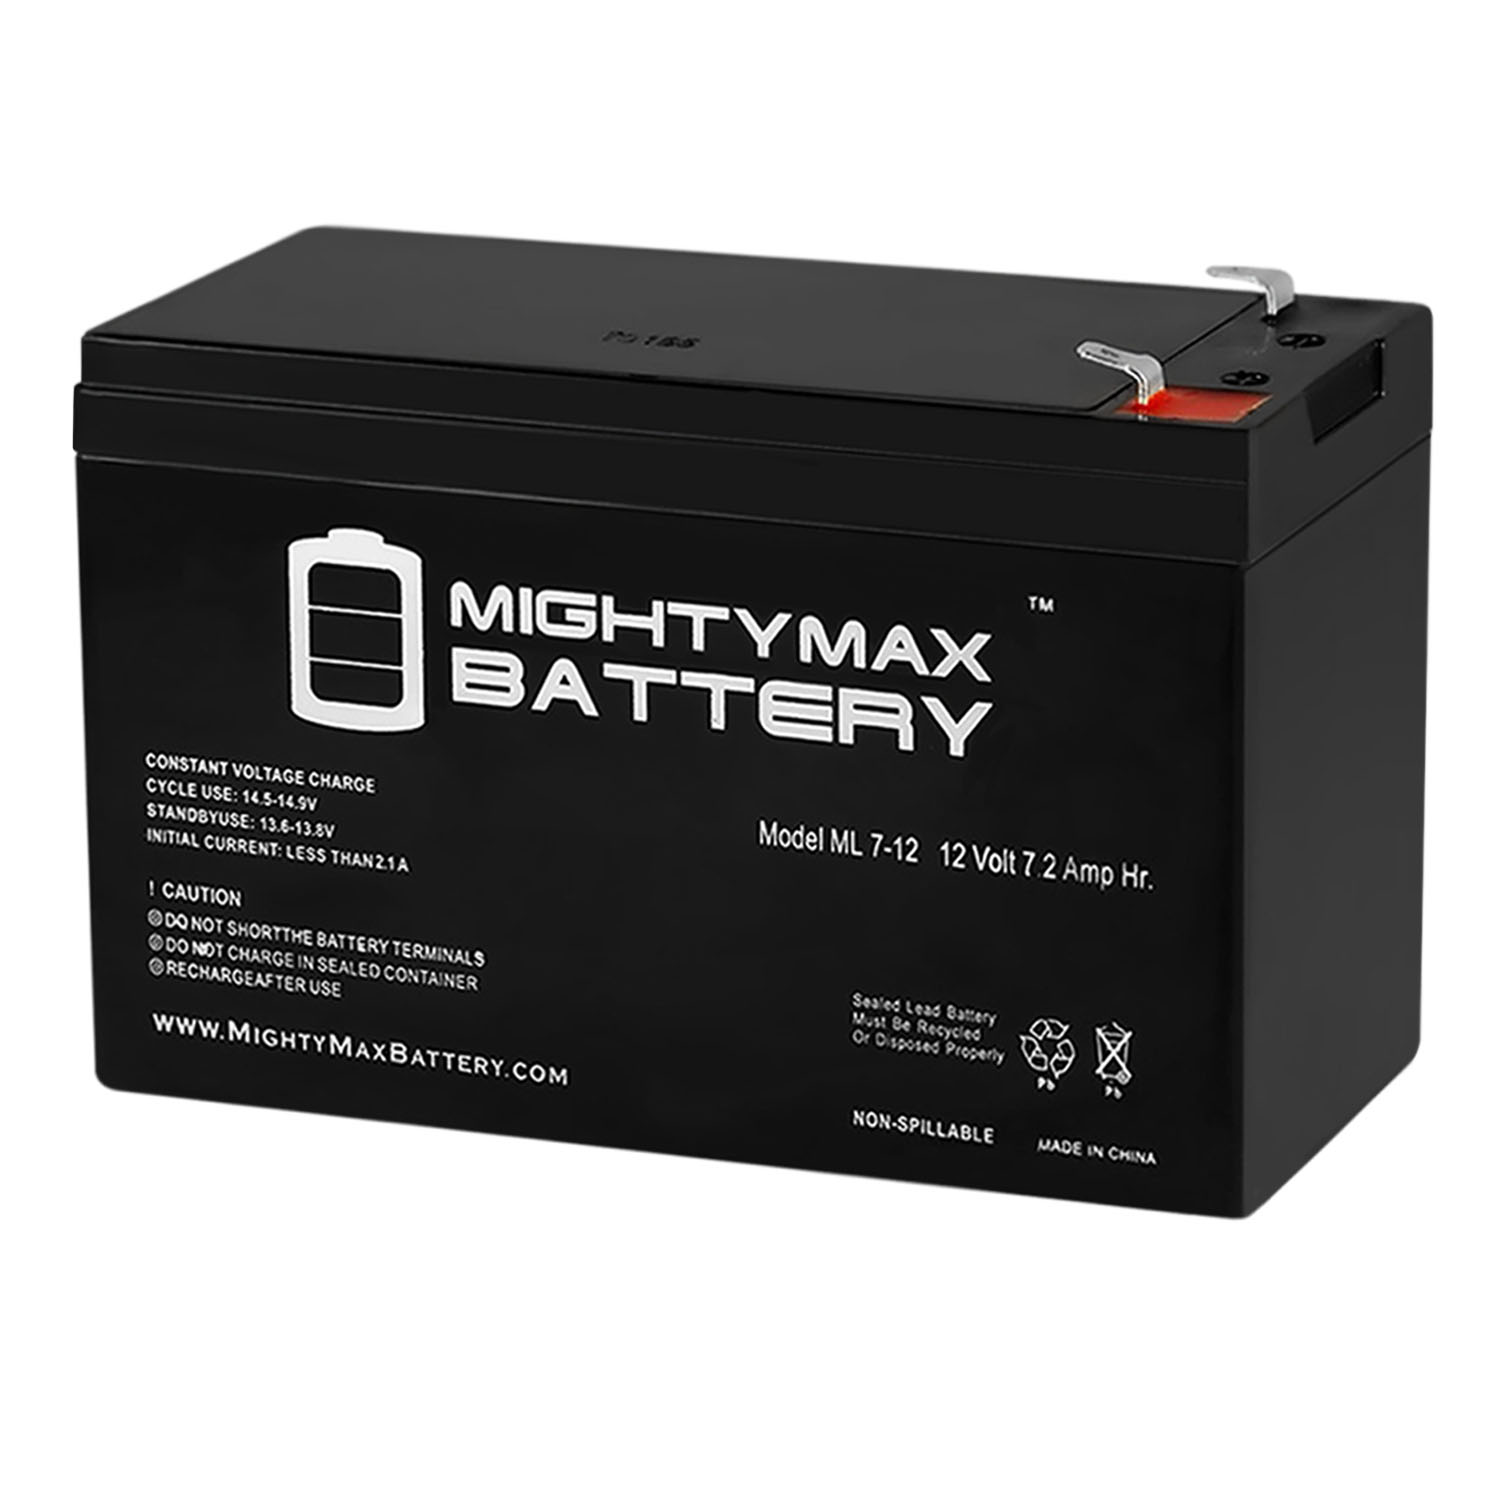 BX1000 Mighty Max Battery 12V 7.2AH UPS Battery Replacement for APC Back-UPS XS XS1000 2 Pack Brand Product 